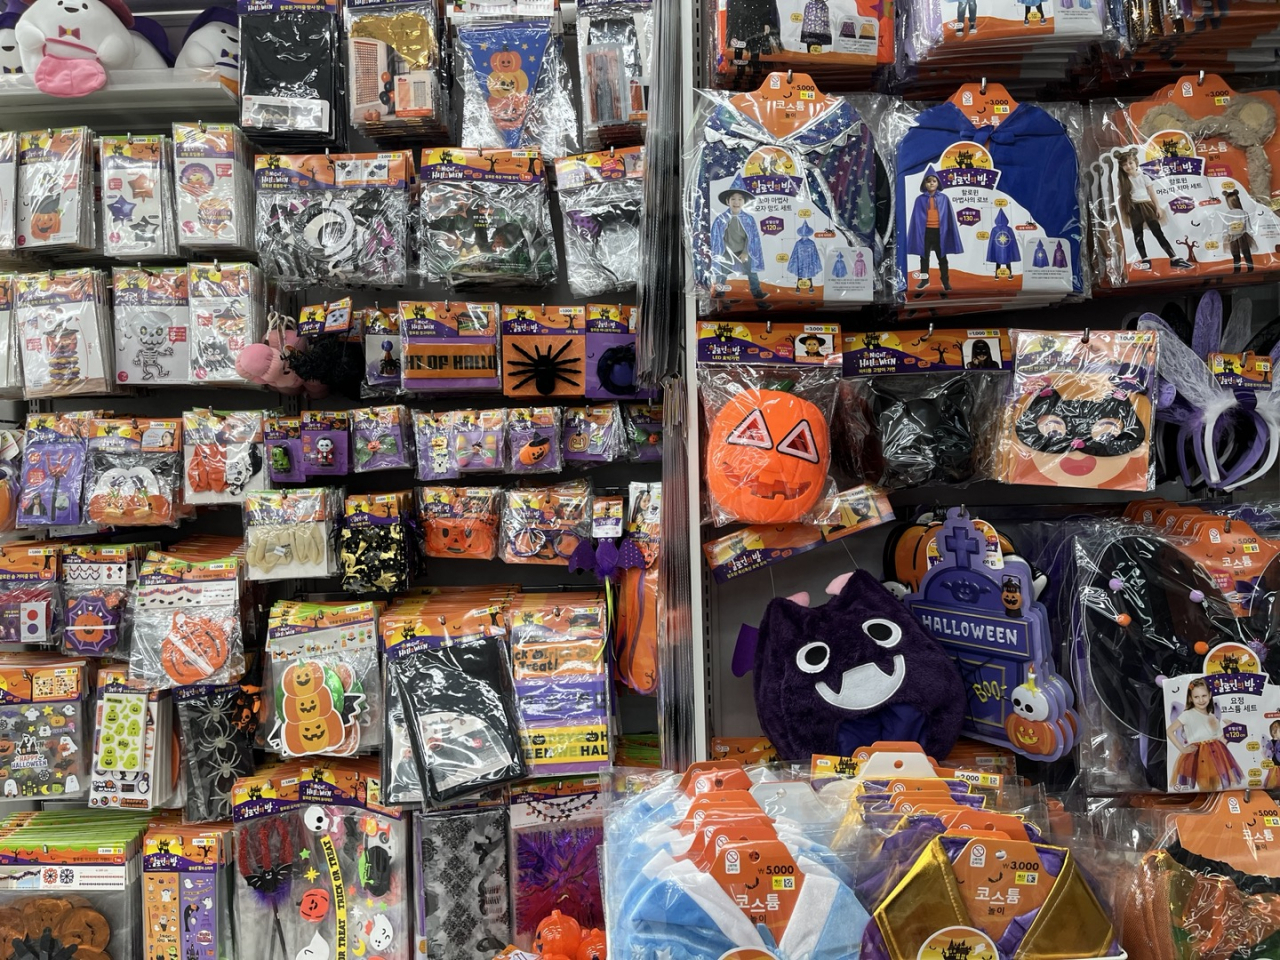 Halloween-themed products are displayed at a Daiso store on Monday. (Lee Jaeeun/The Korea Herald)